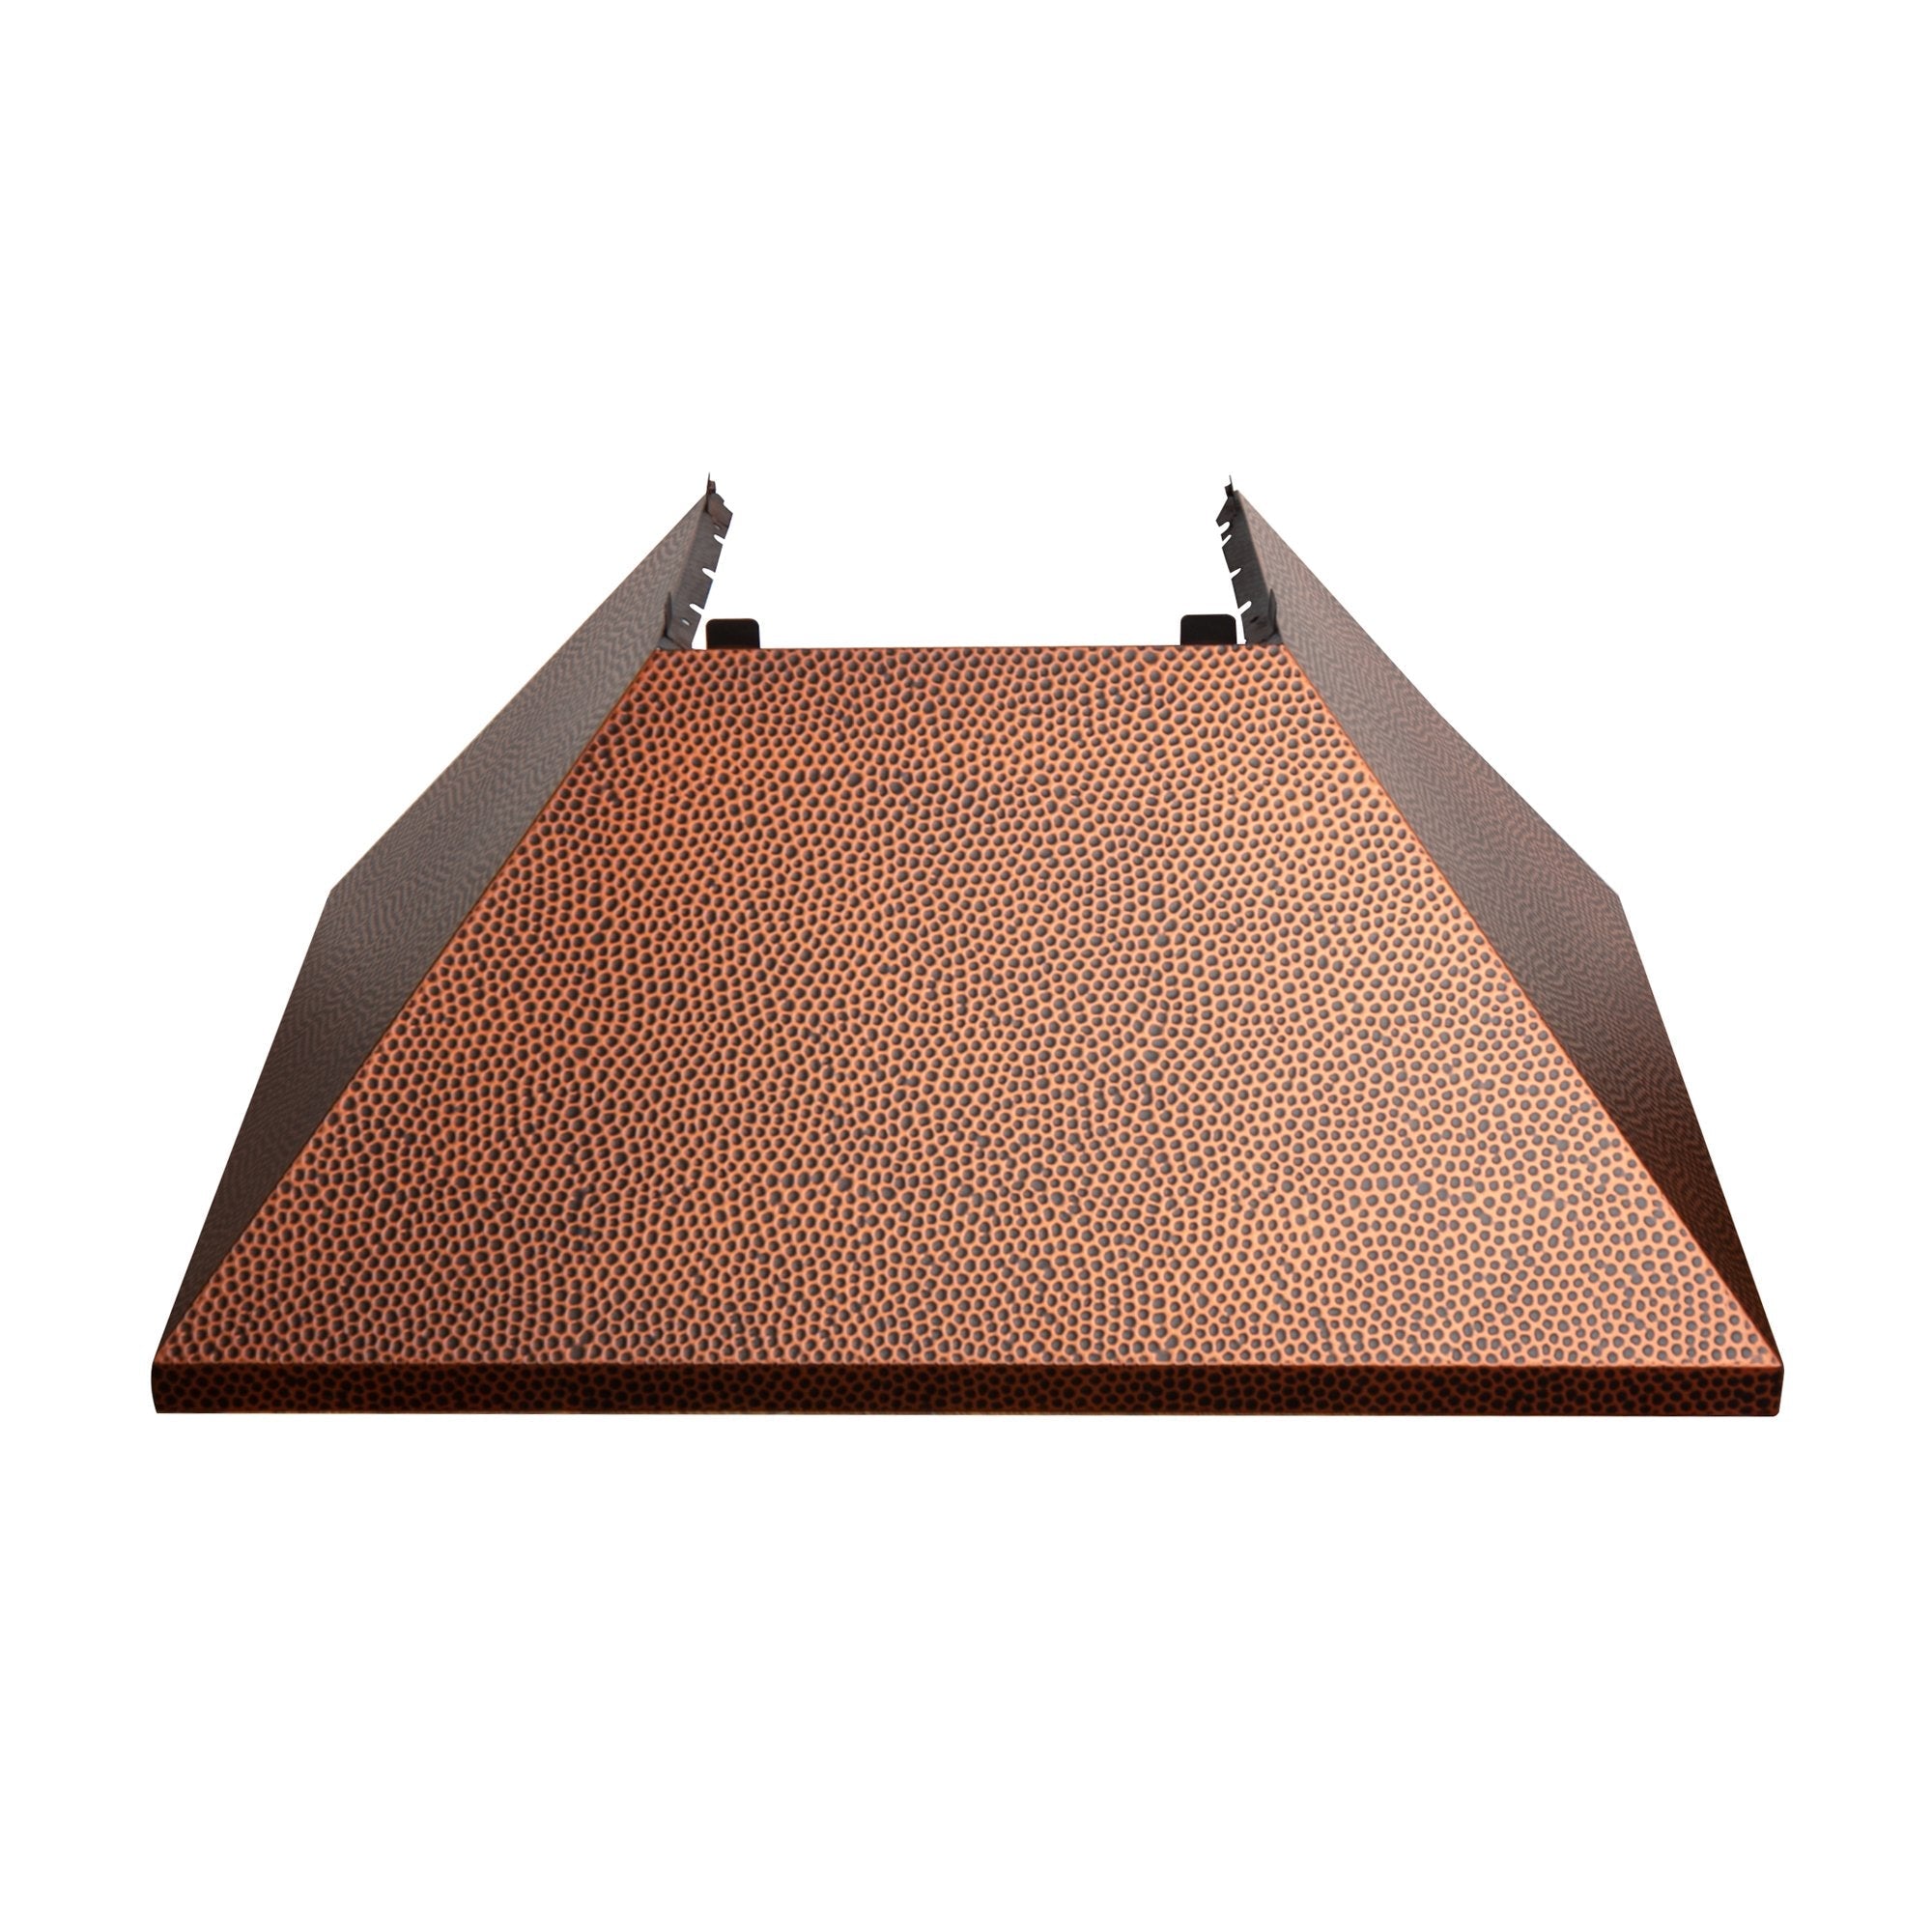 30" Ducted Fingerprint Resistant Stainless Steel Range Hood with Hand-Hammered Copper Shell (8654HH-30)